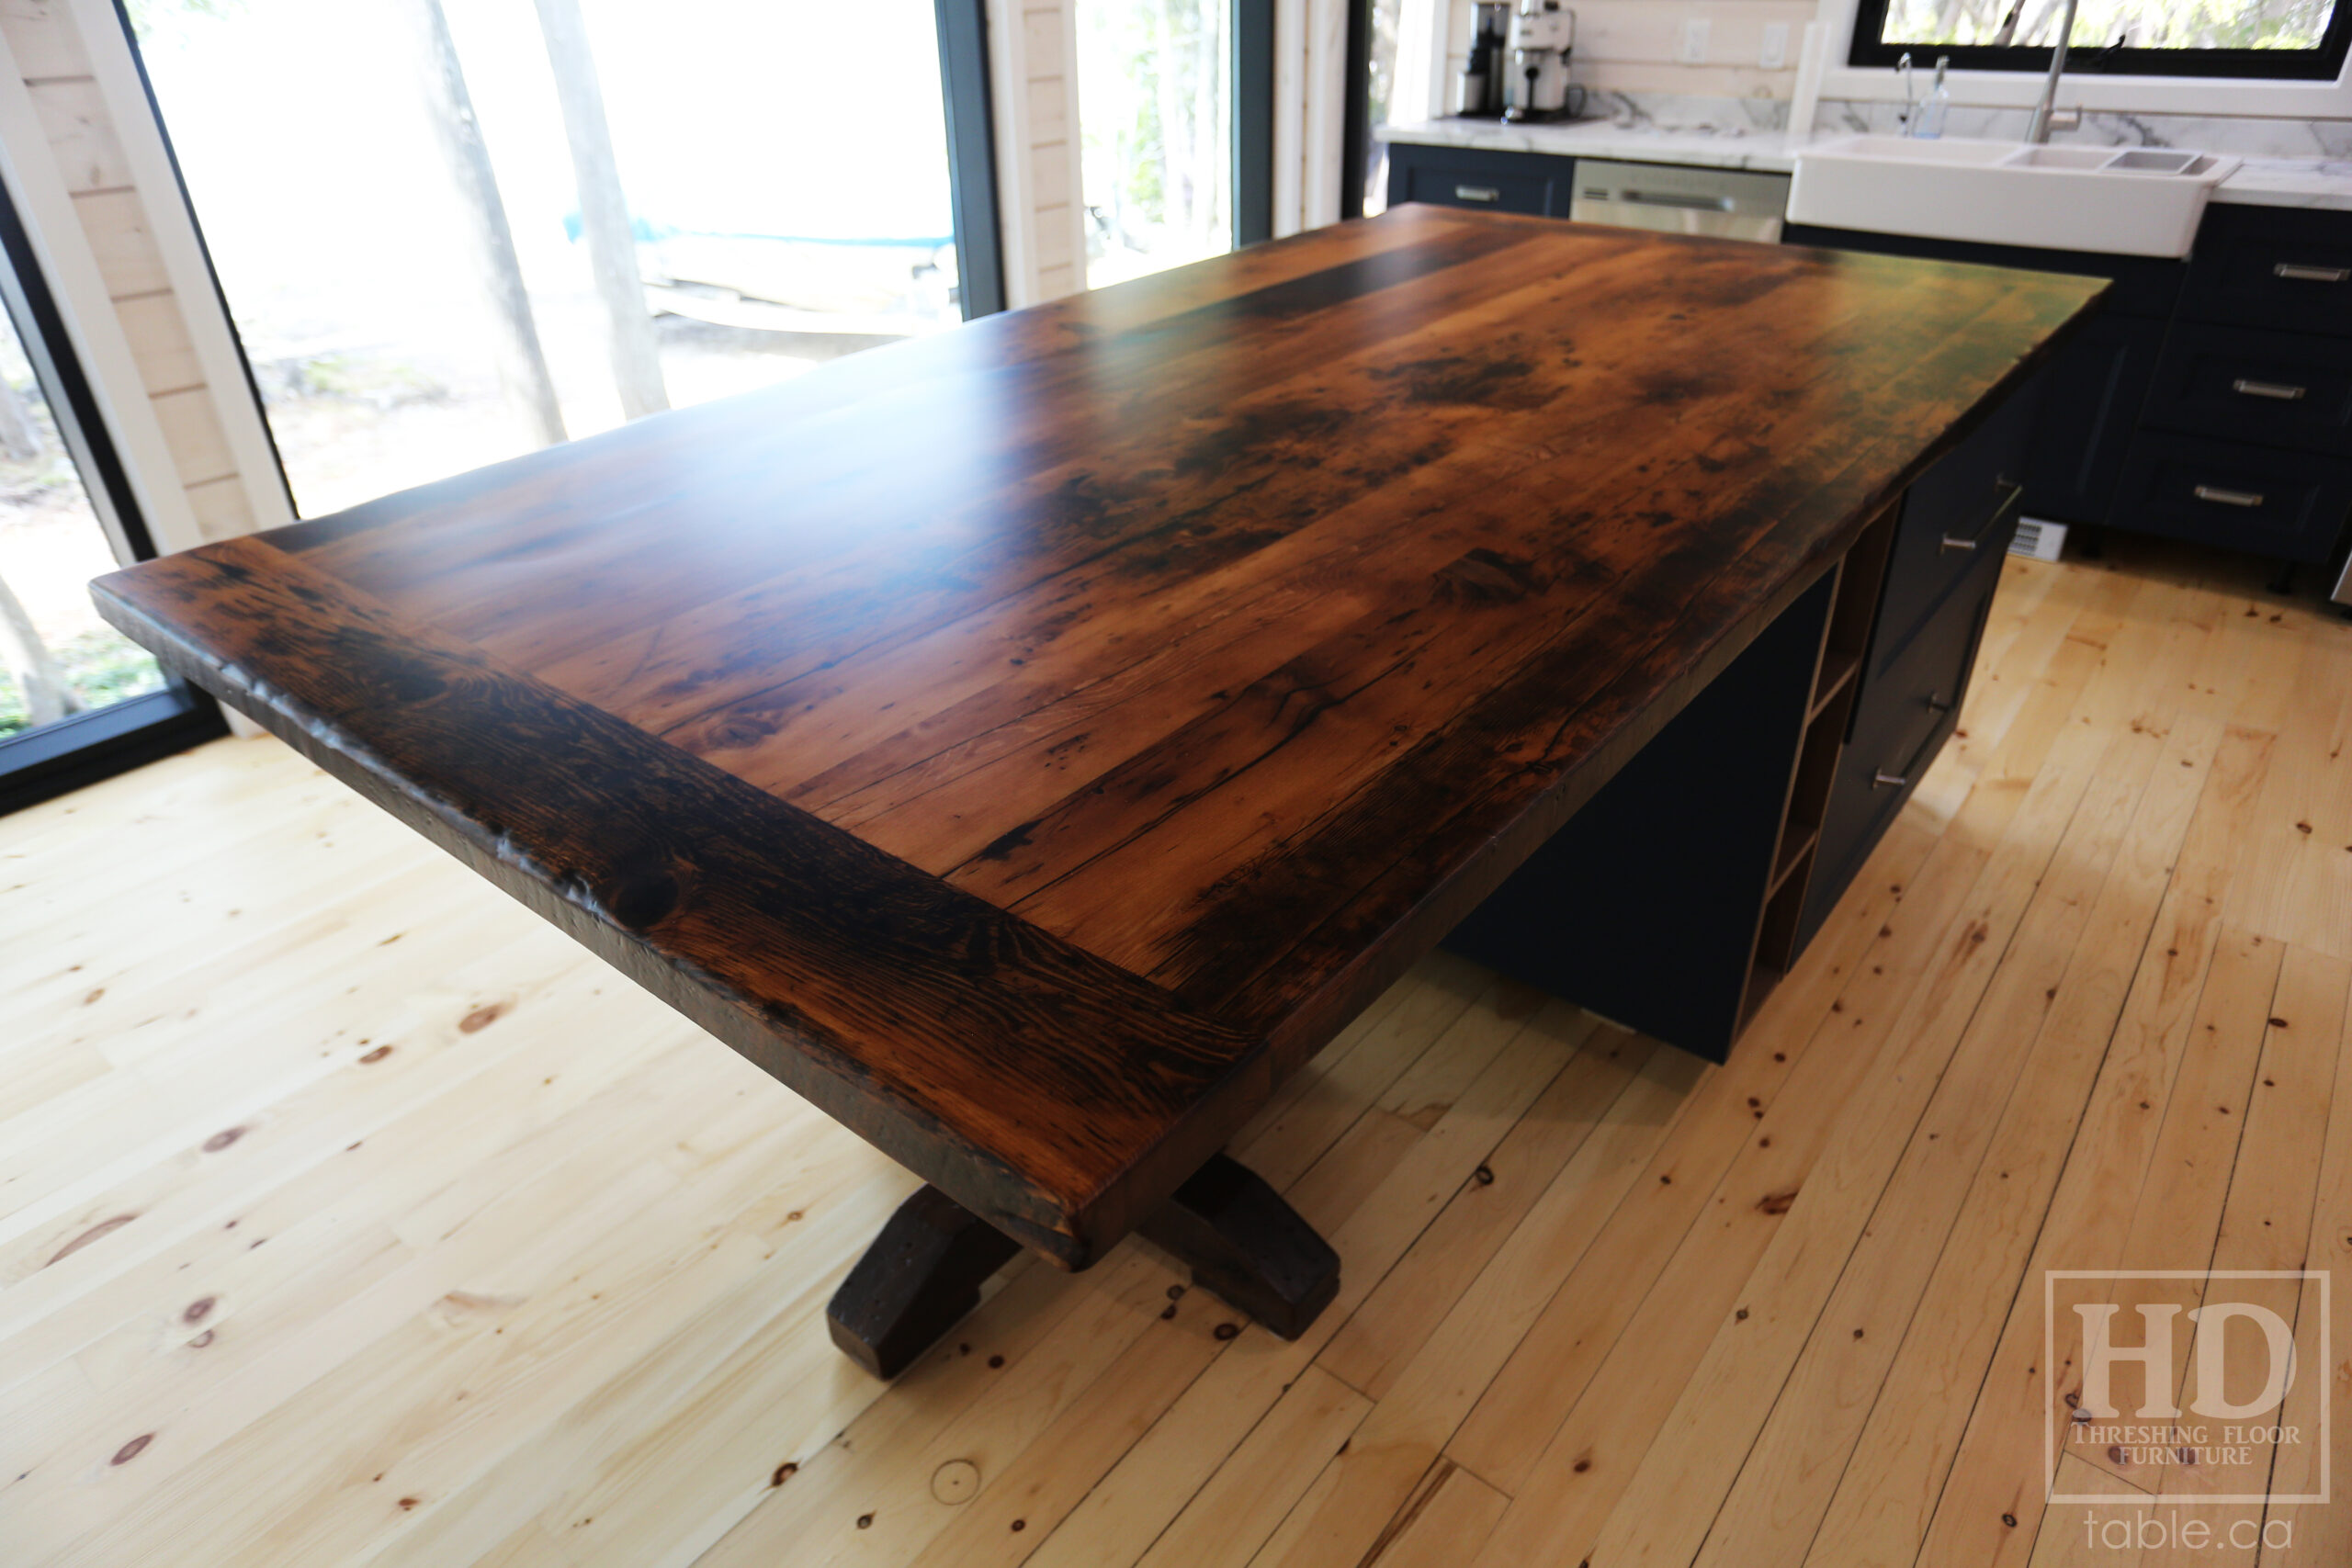 98" Ontario Barnwood Island Top & post we made for a Wiarton, Ontario Home - 52" wide - 34" height - Hand-Hewn Post at End to Extend Island Top - 2" Hemlock Threshing Floor Construction - Original barnwood edges & distressing maintained - Premium epoxy + matte polyurethane finish - www.table.ca